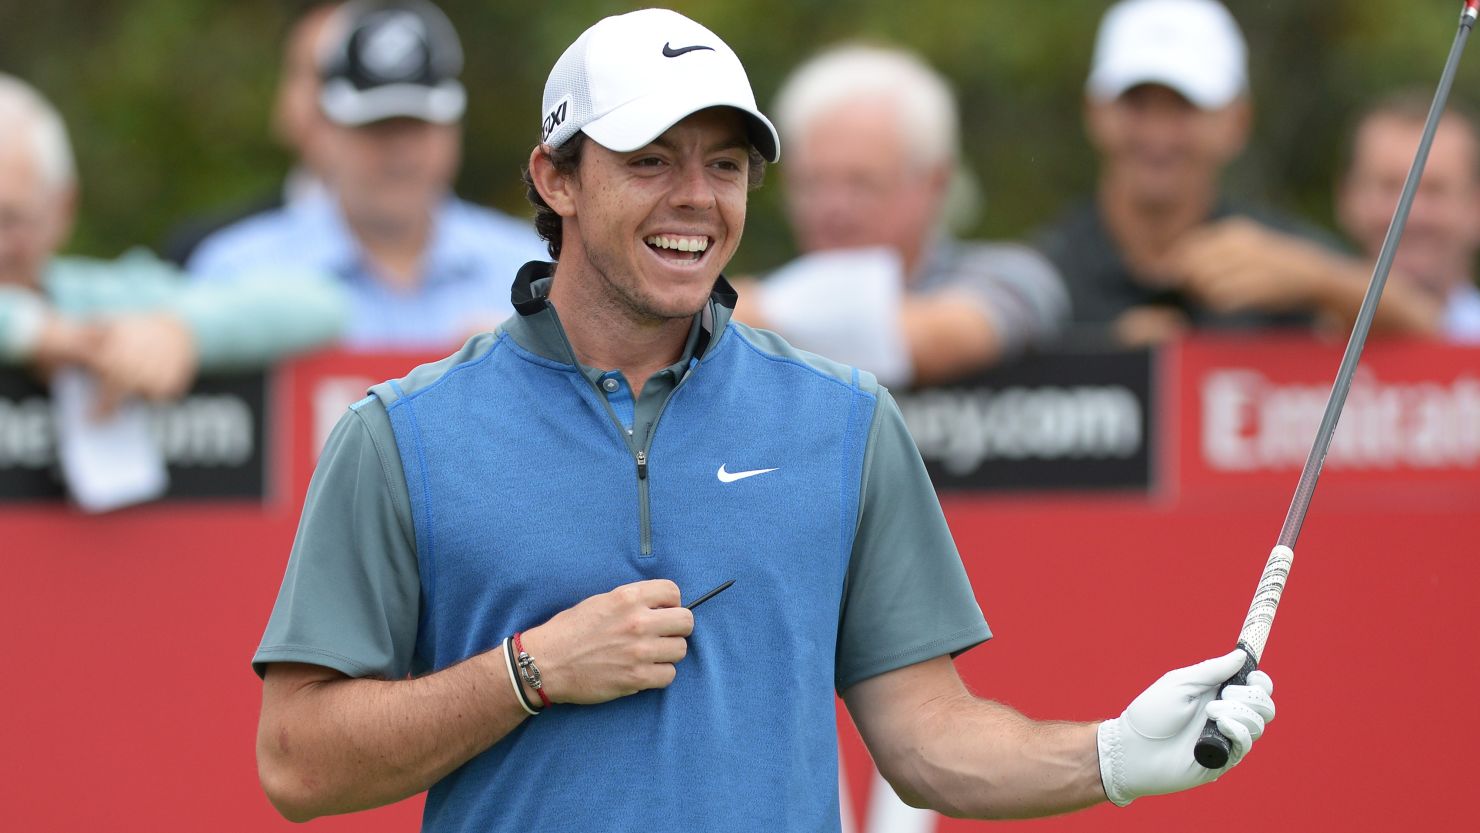 World No. 6 Rory McIlroy is all smiles after enjoying a good day at the Australian Open.